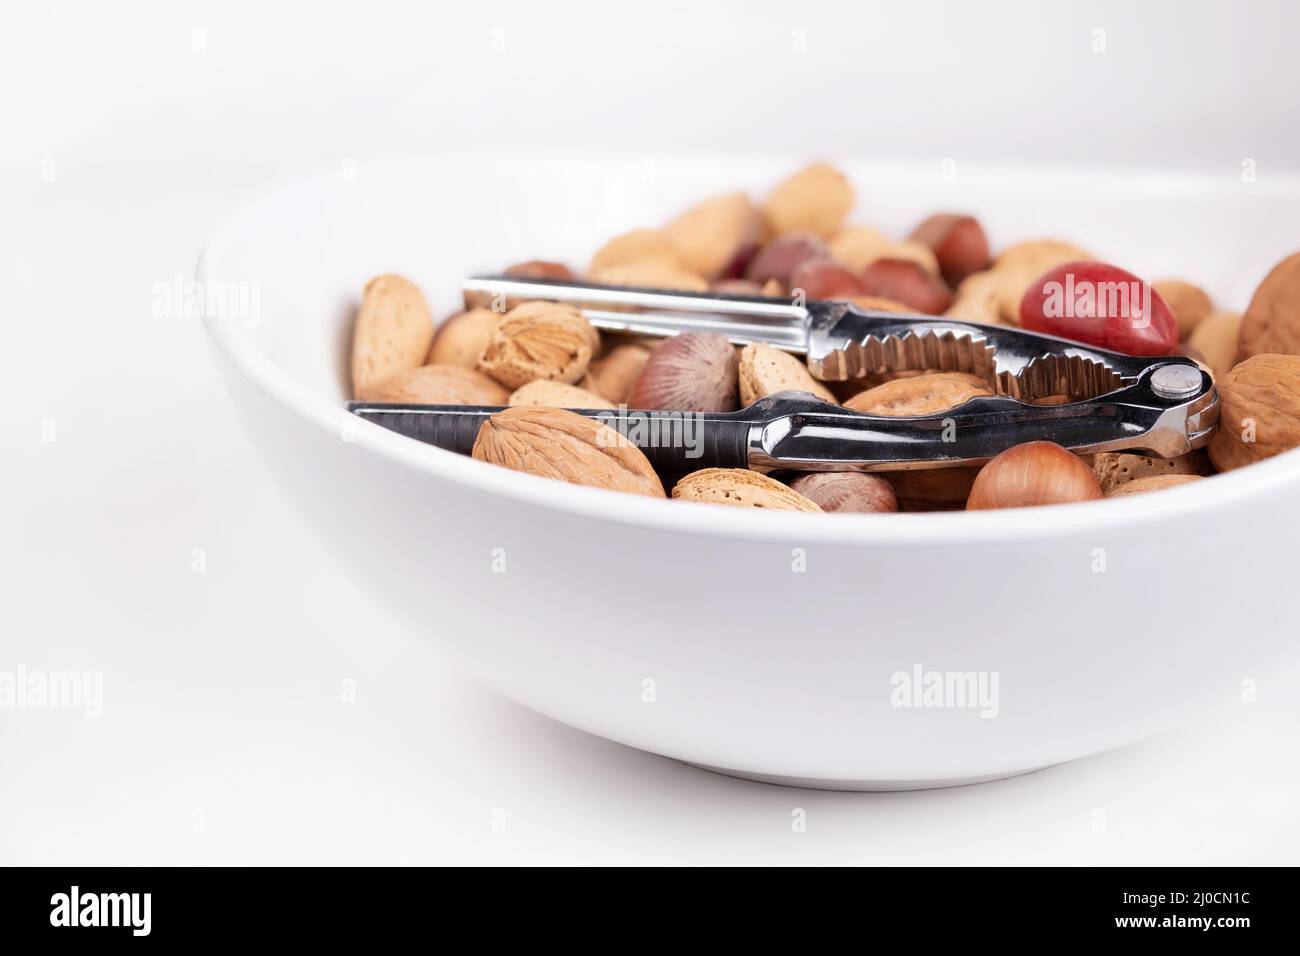 Variety of shelled nuts with nutcracker pliers in a bowl, close up. Pile of unsalted walnuts, pecans, almonds and hazelnuts in shell. Healthy fat conc Stock Photo